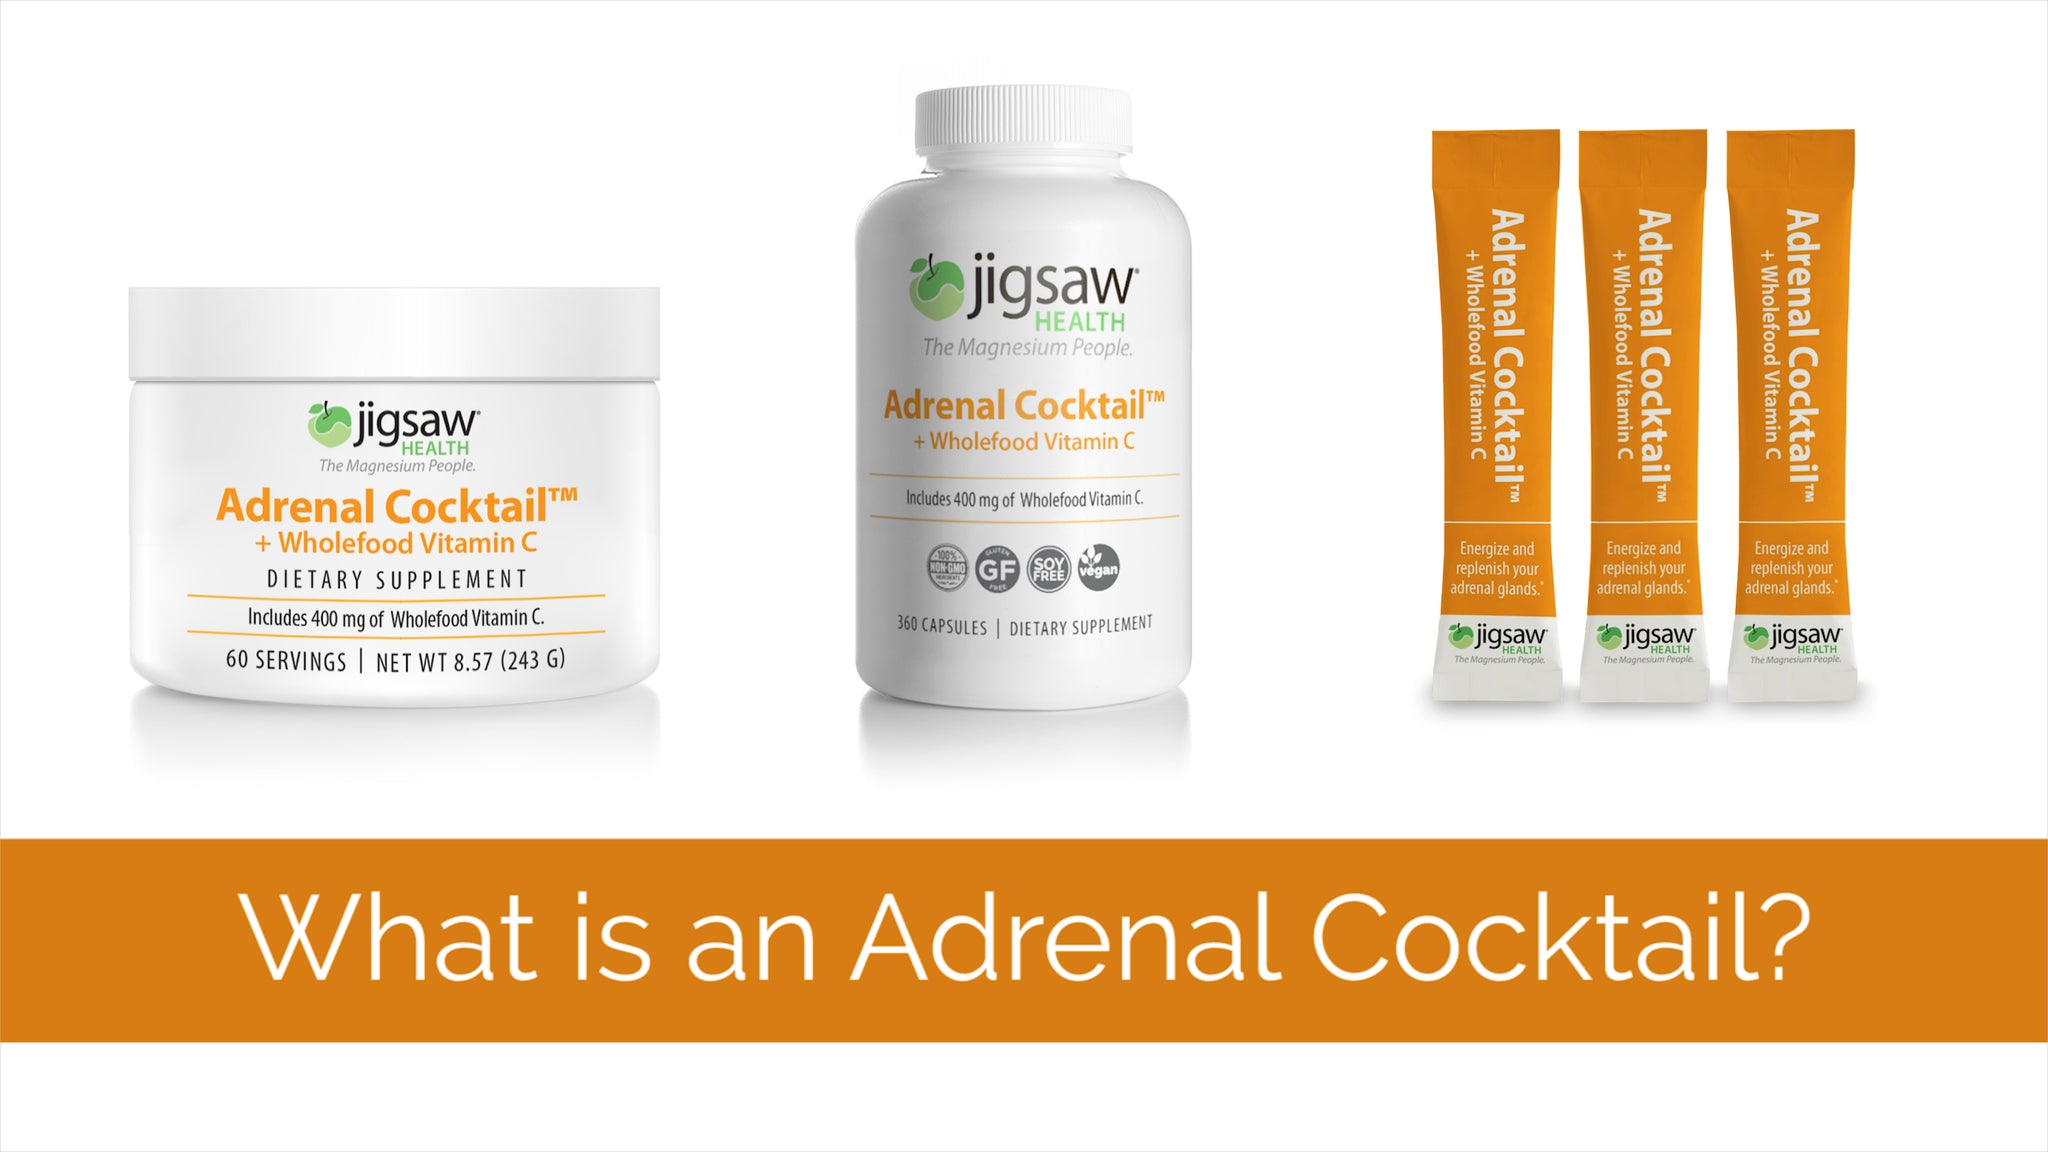 What is an Adrenal Cocktail?